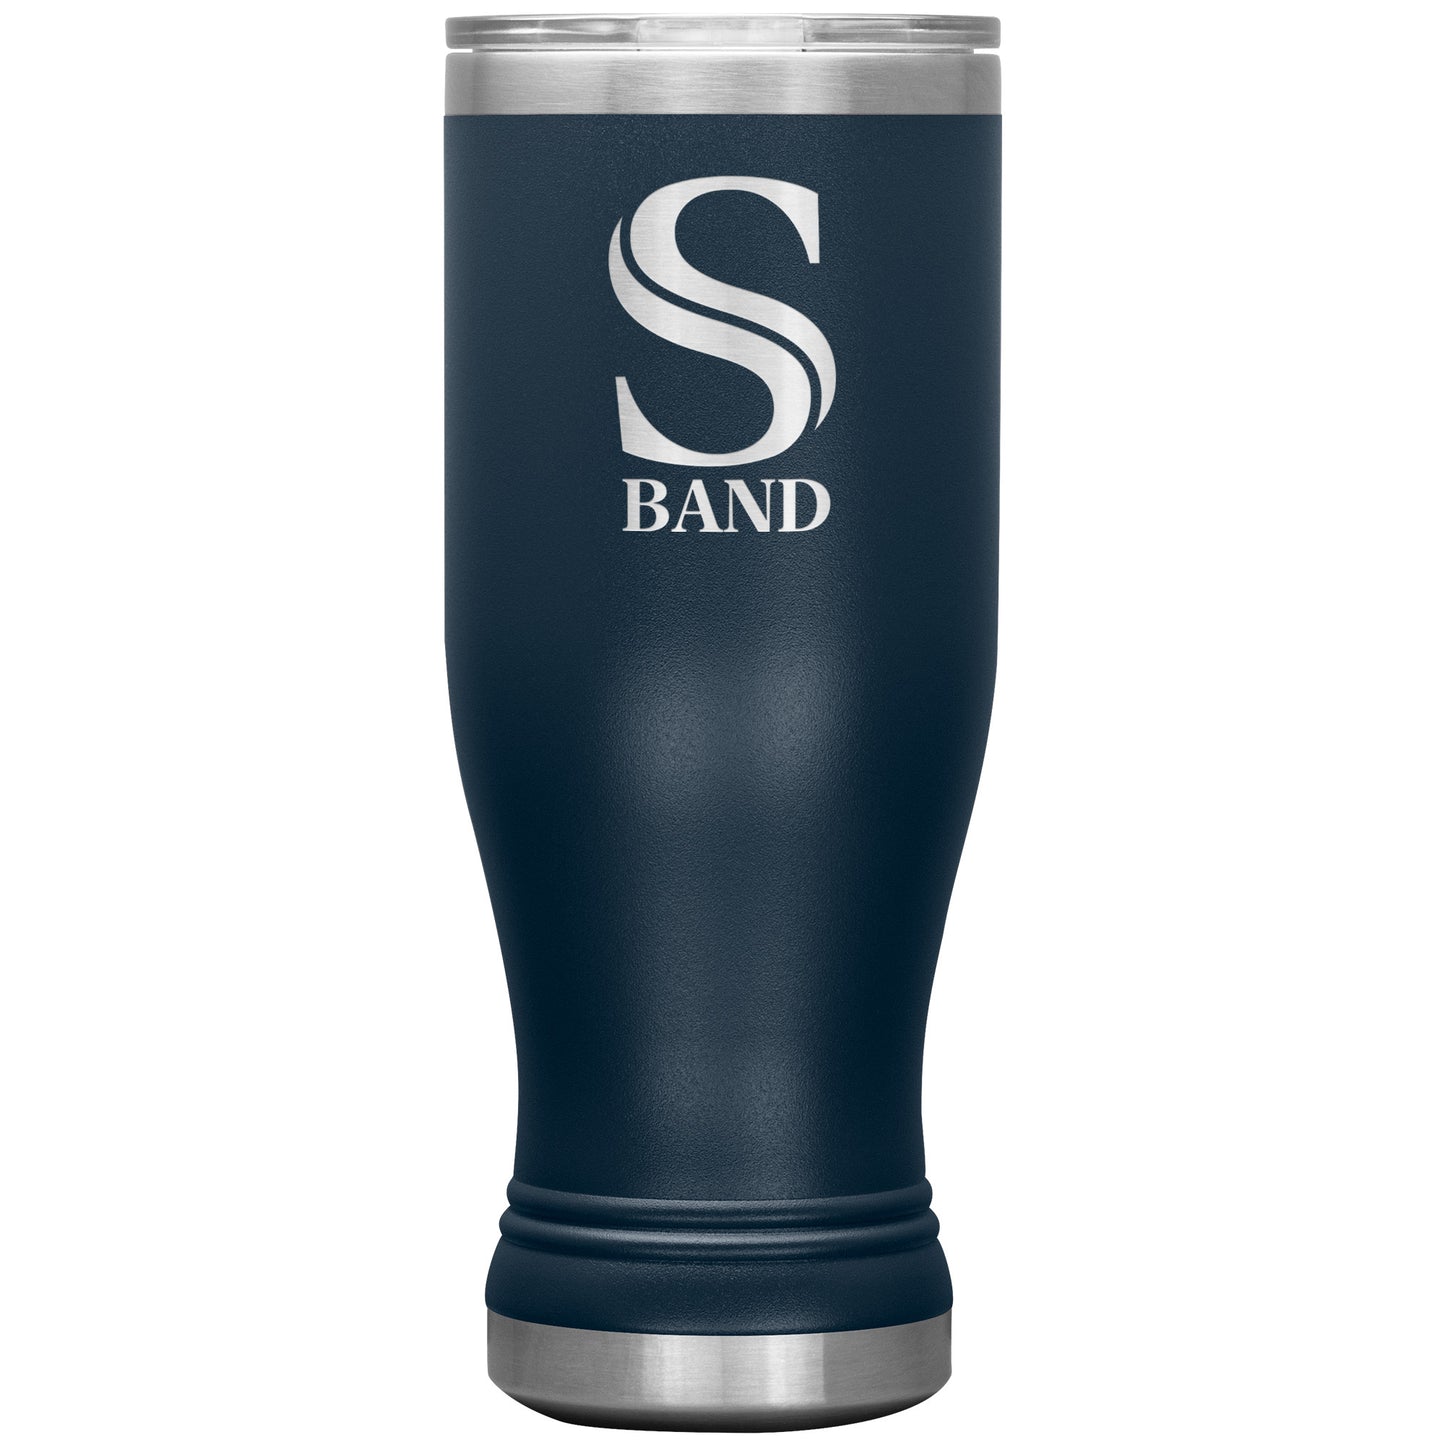 SS Band Insulated Tumblers